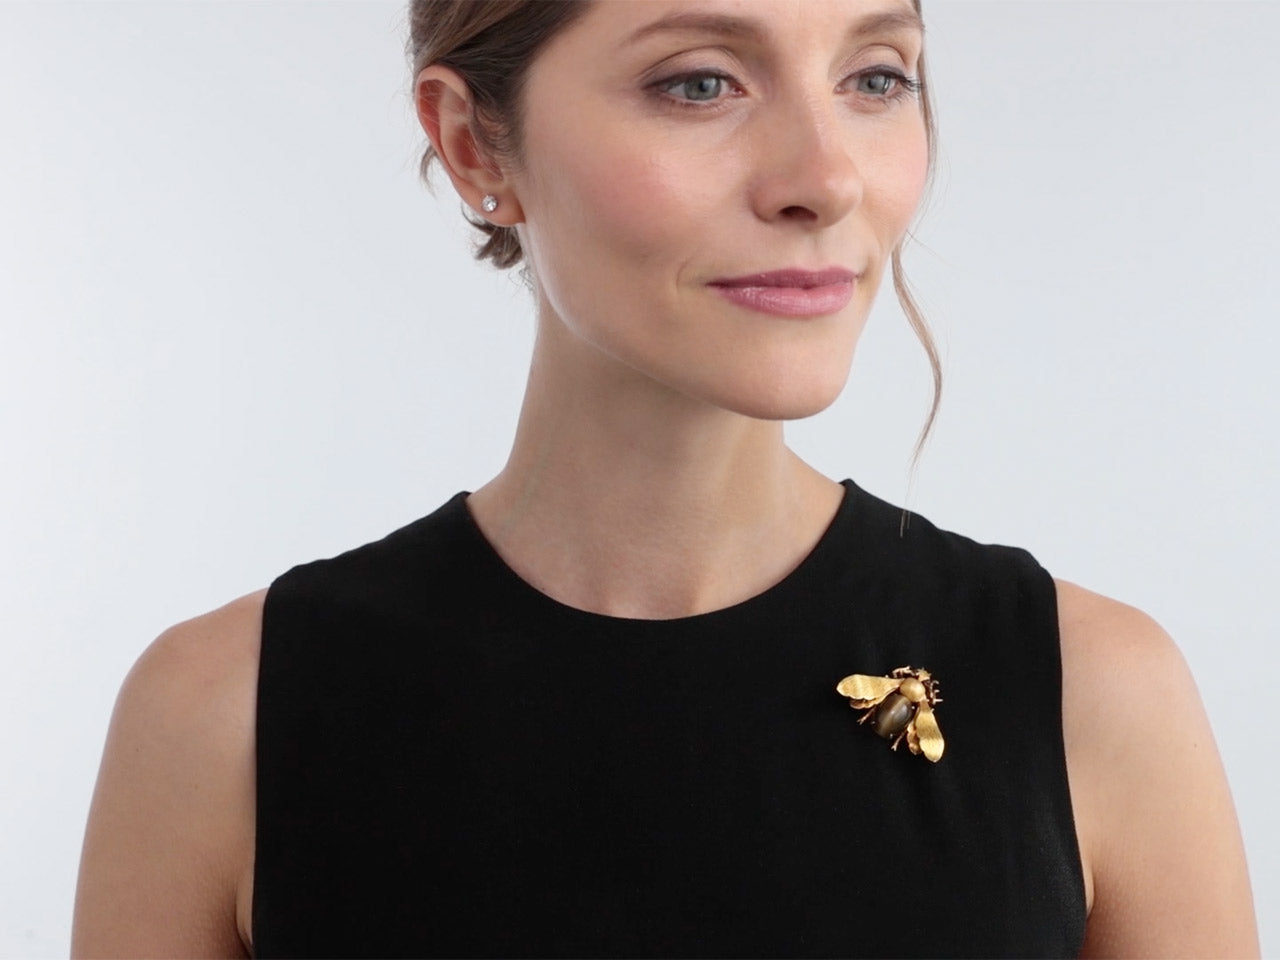 Fly Pin in 18K Gold, French